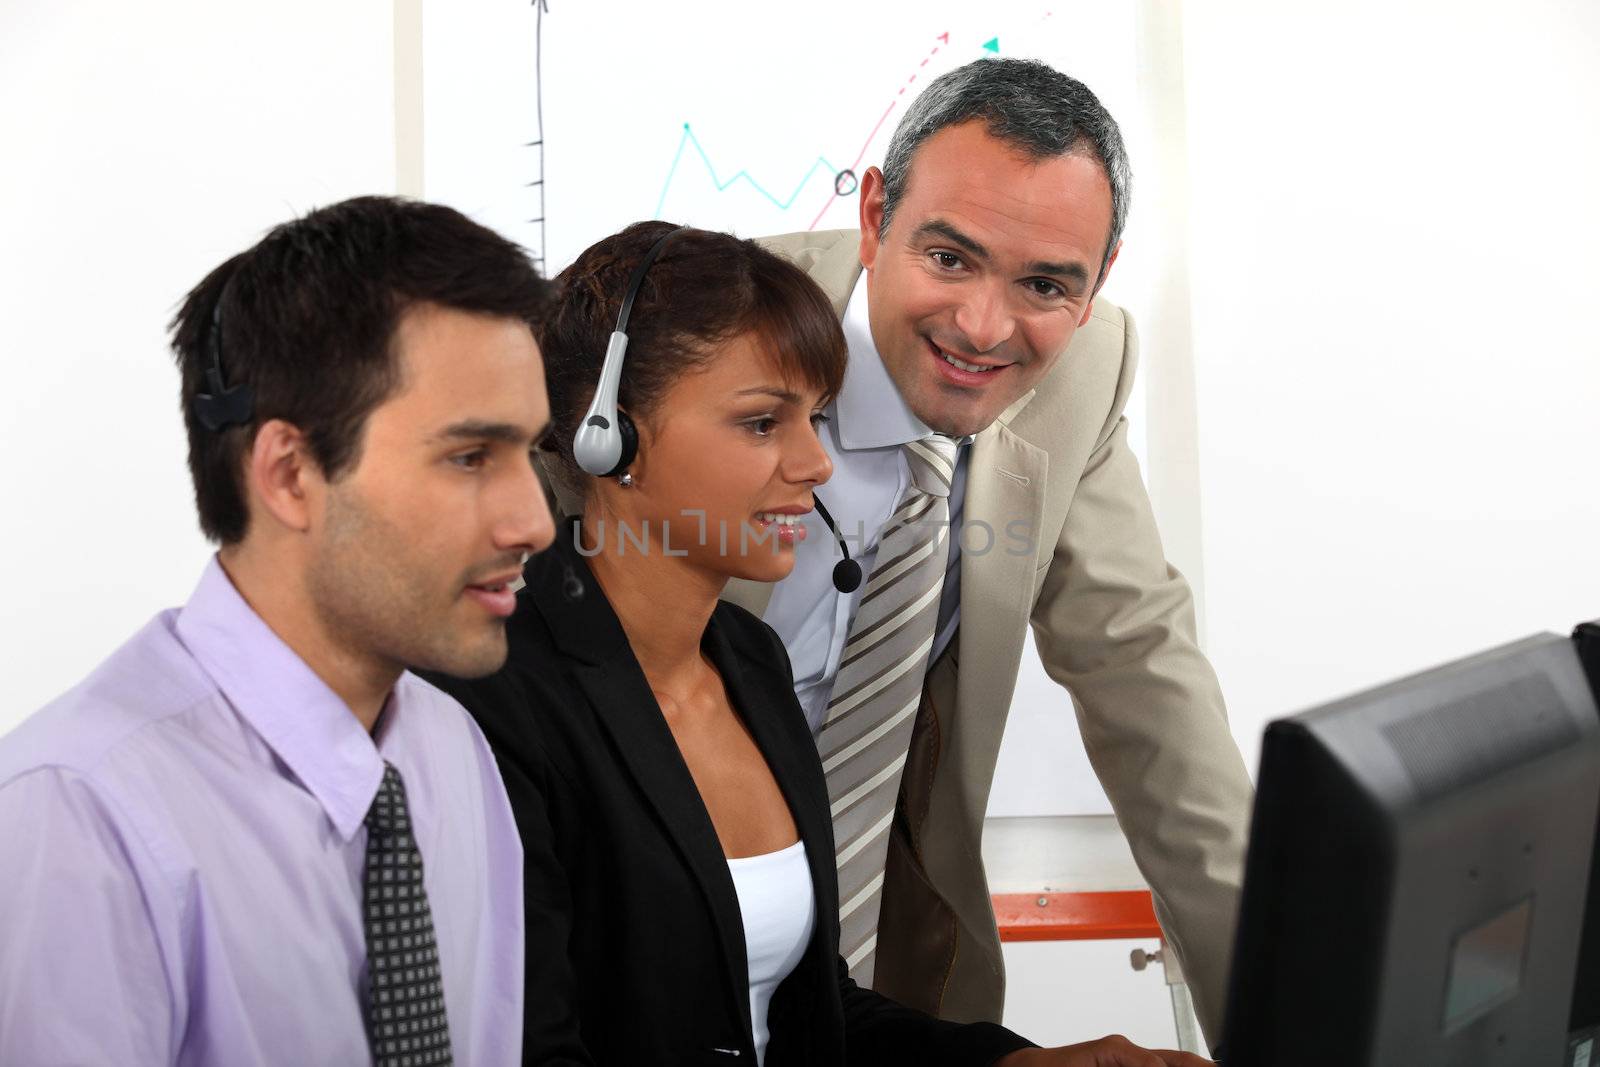 Call-center worker being trained by phovoir